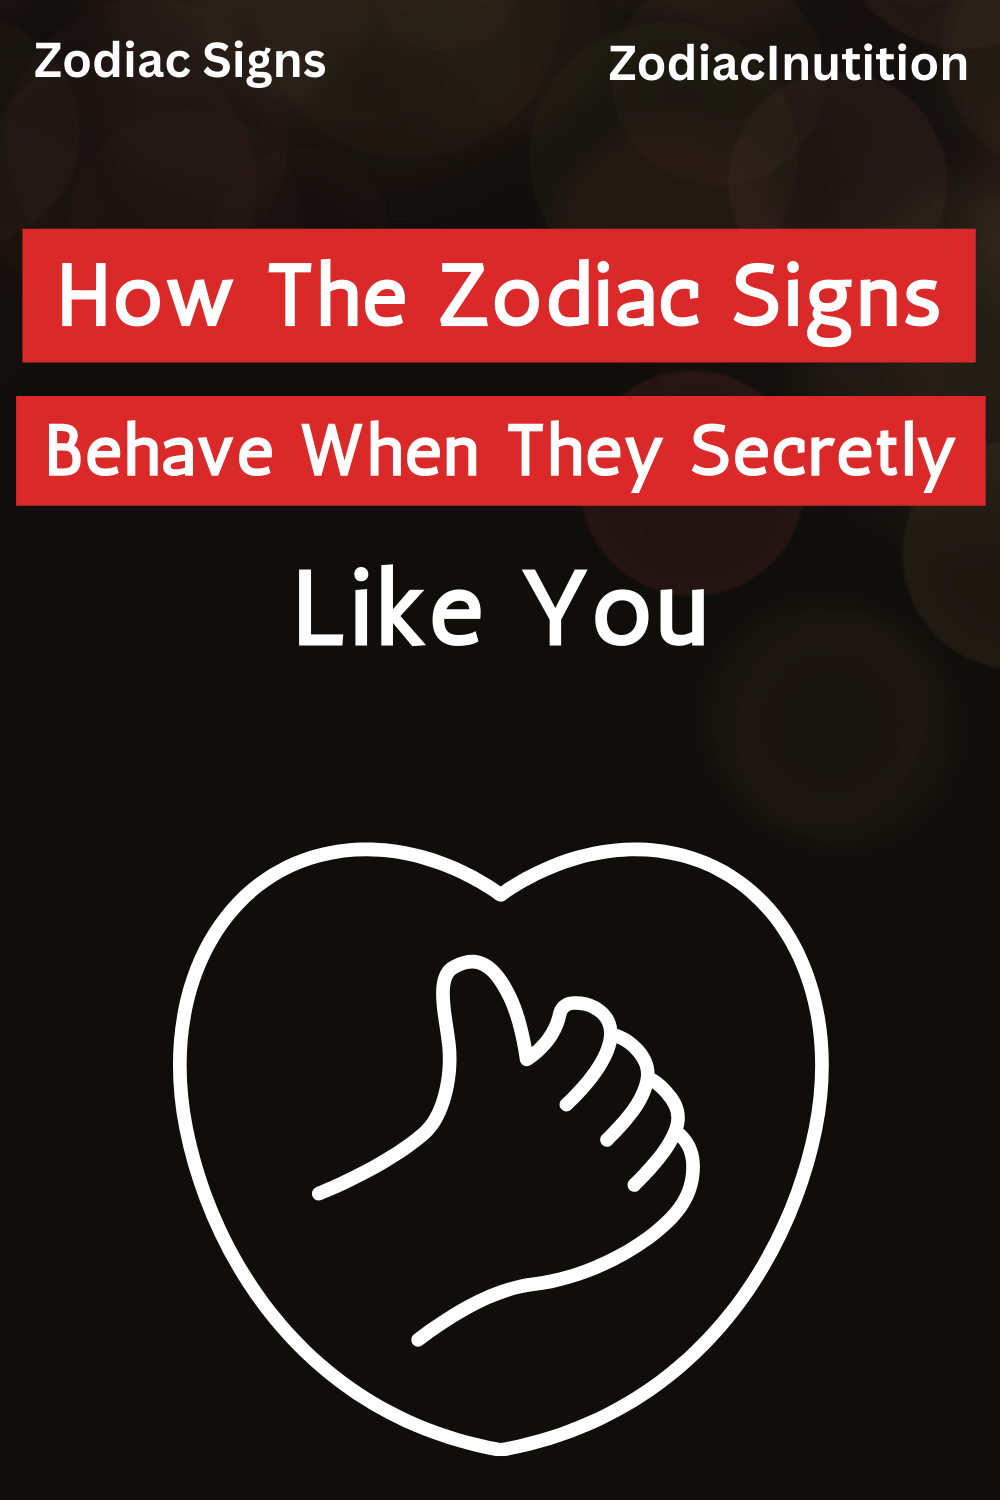 How The Zodiac Signs Behave When They Secretly Like You